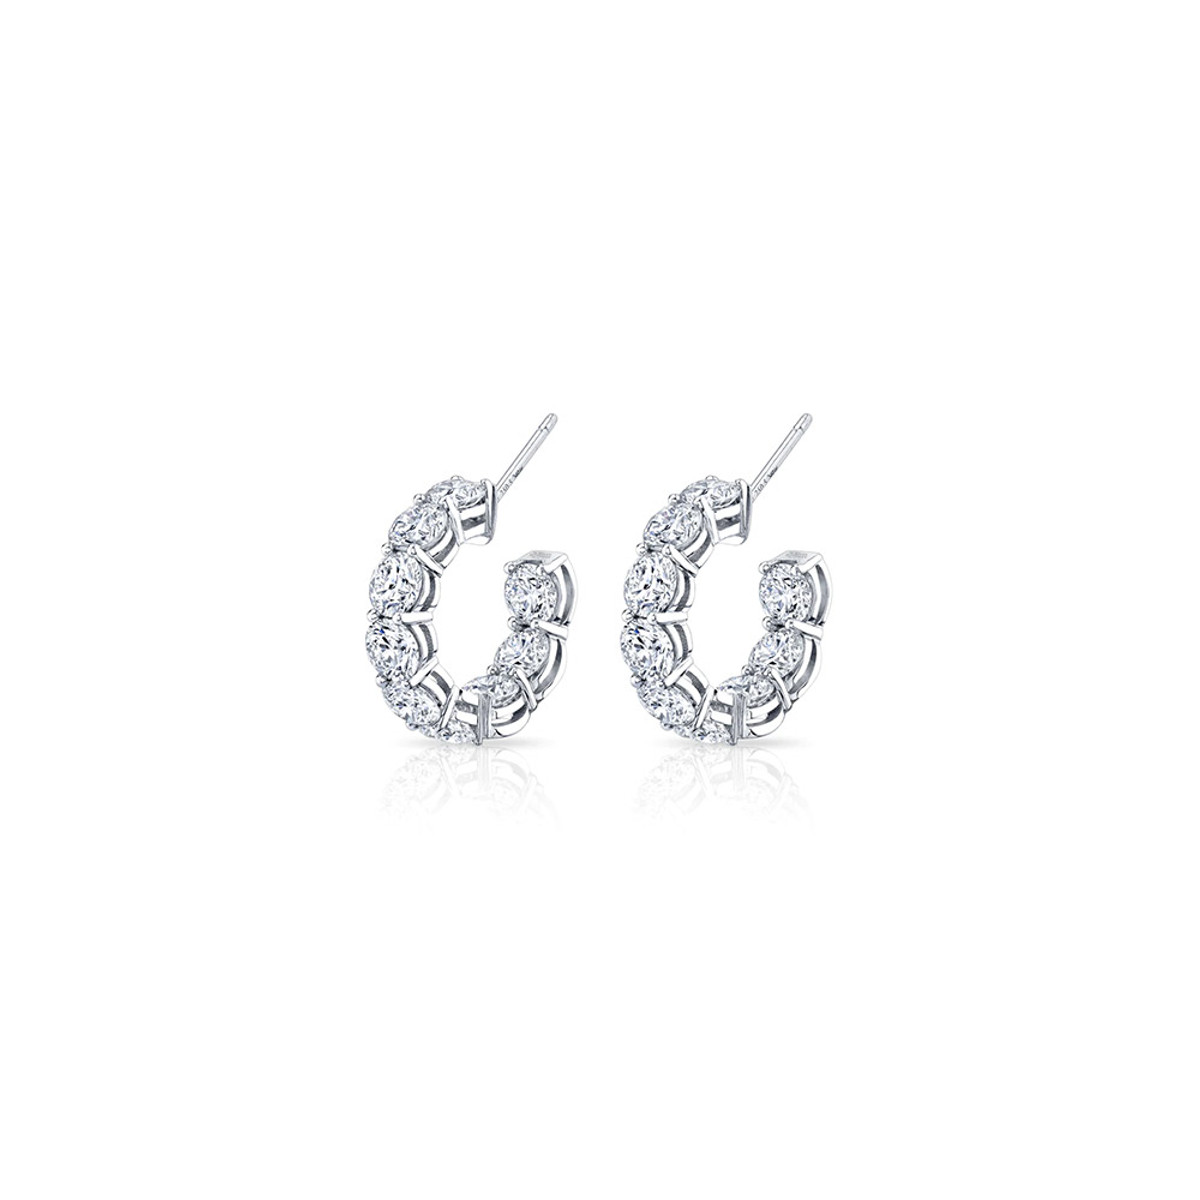 Hyde Park Collection 18K White Gold Diamond Hoop Earrings-39511 Product Image